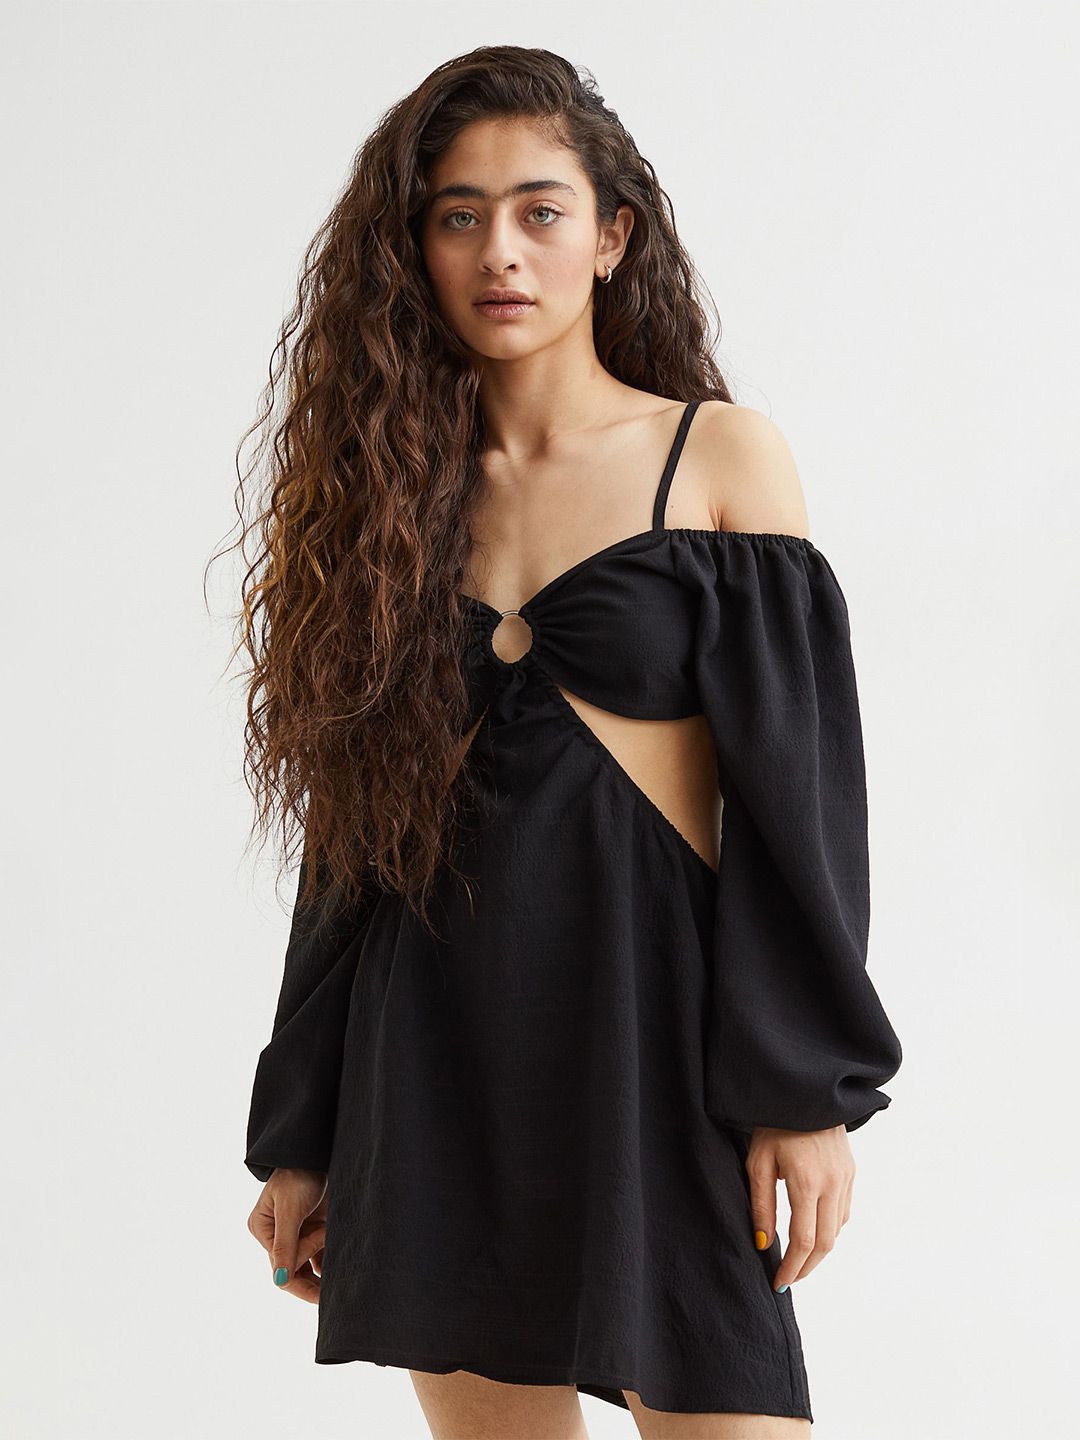 H&M Women Black Short Cut-Out Dress Price in India